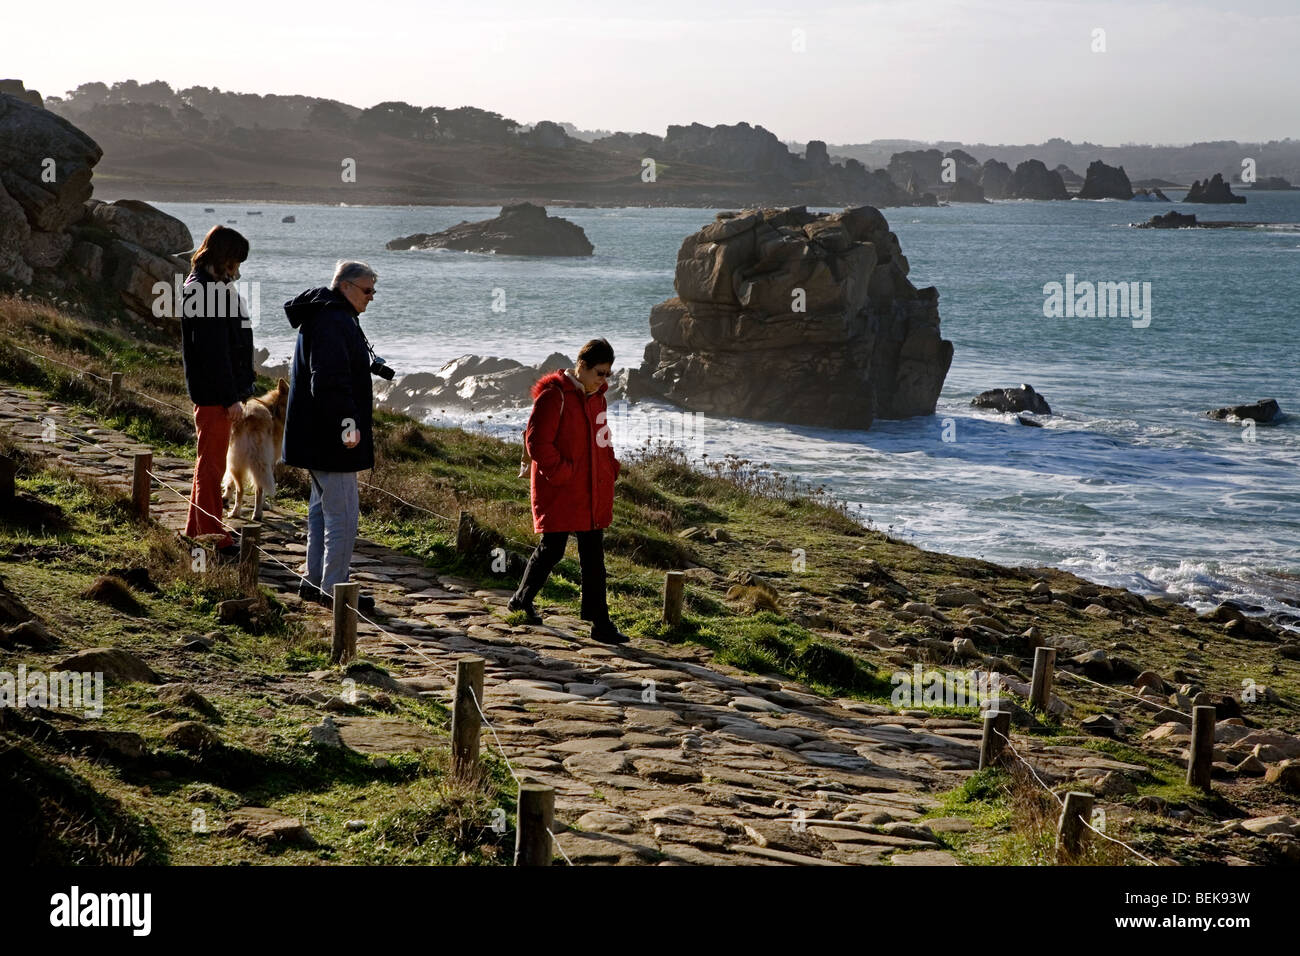 Tourists visiting Le Gouffre, Brittany, France Stock Photo